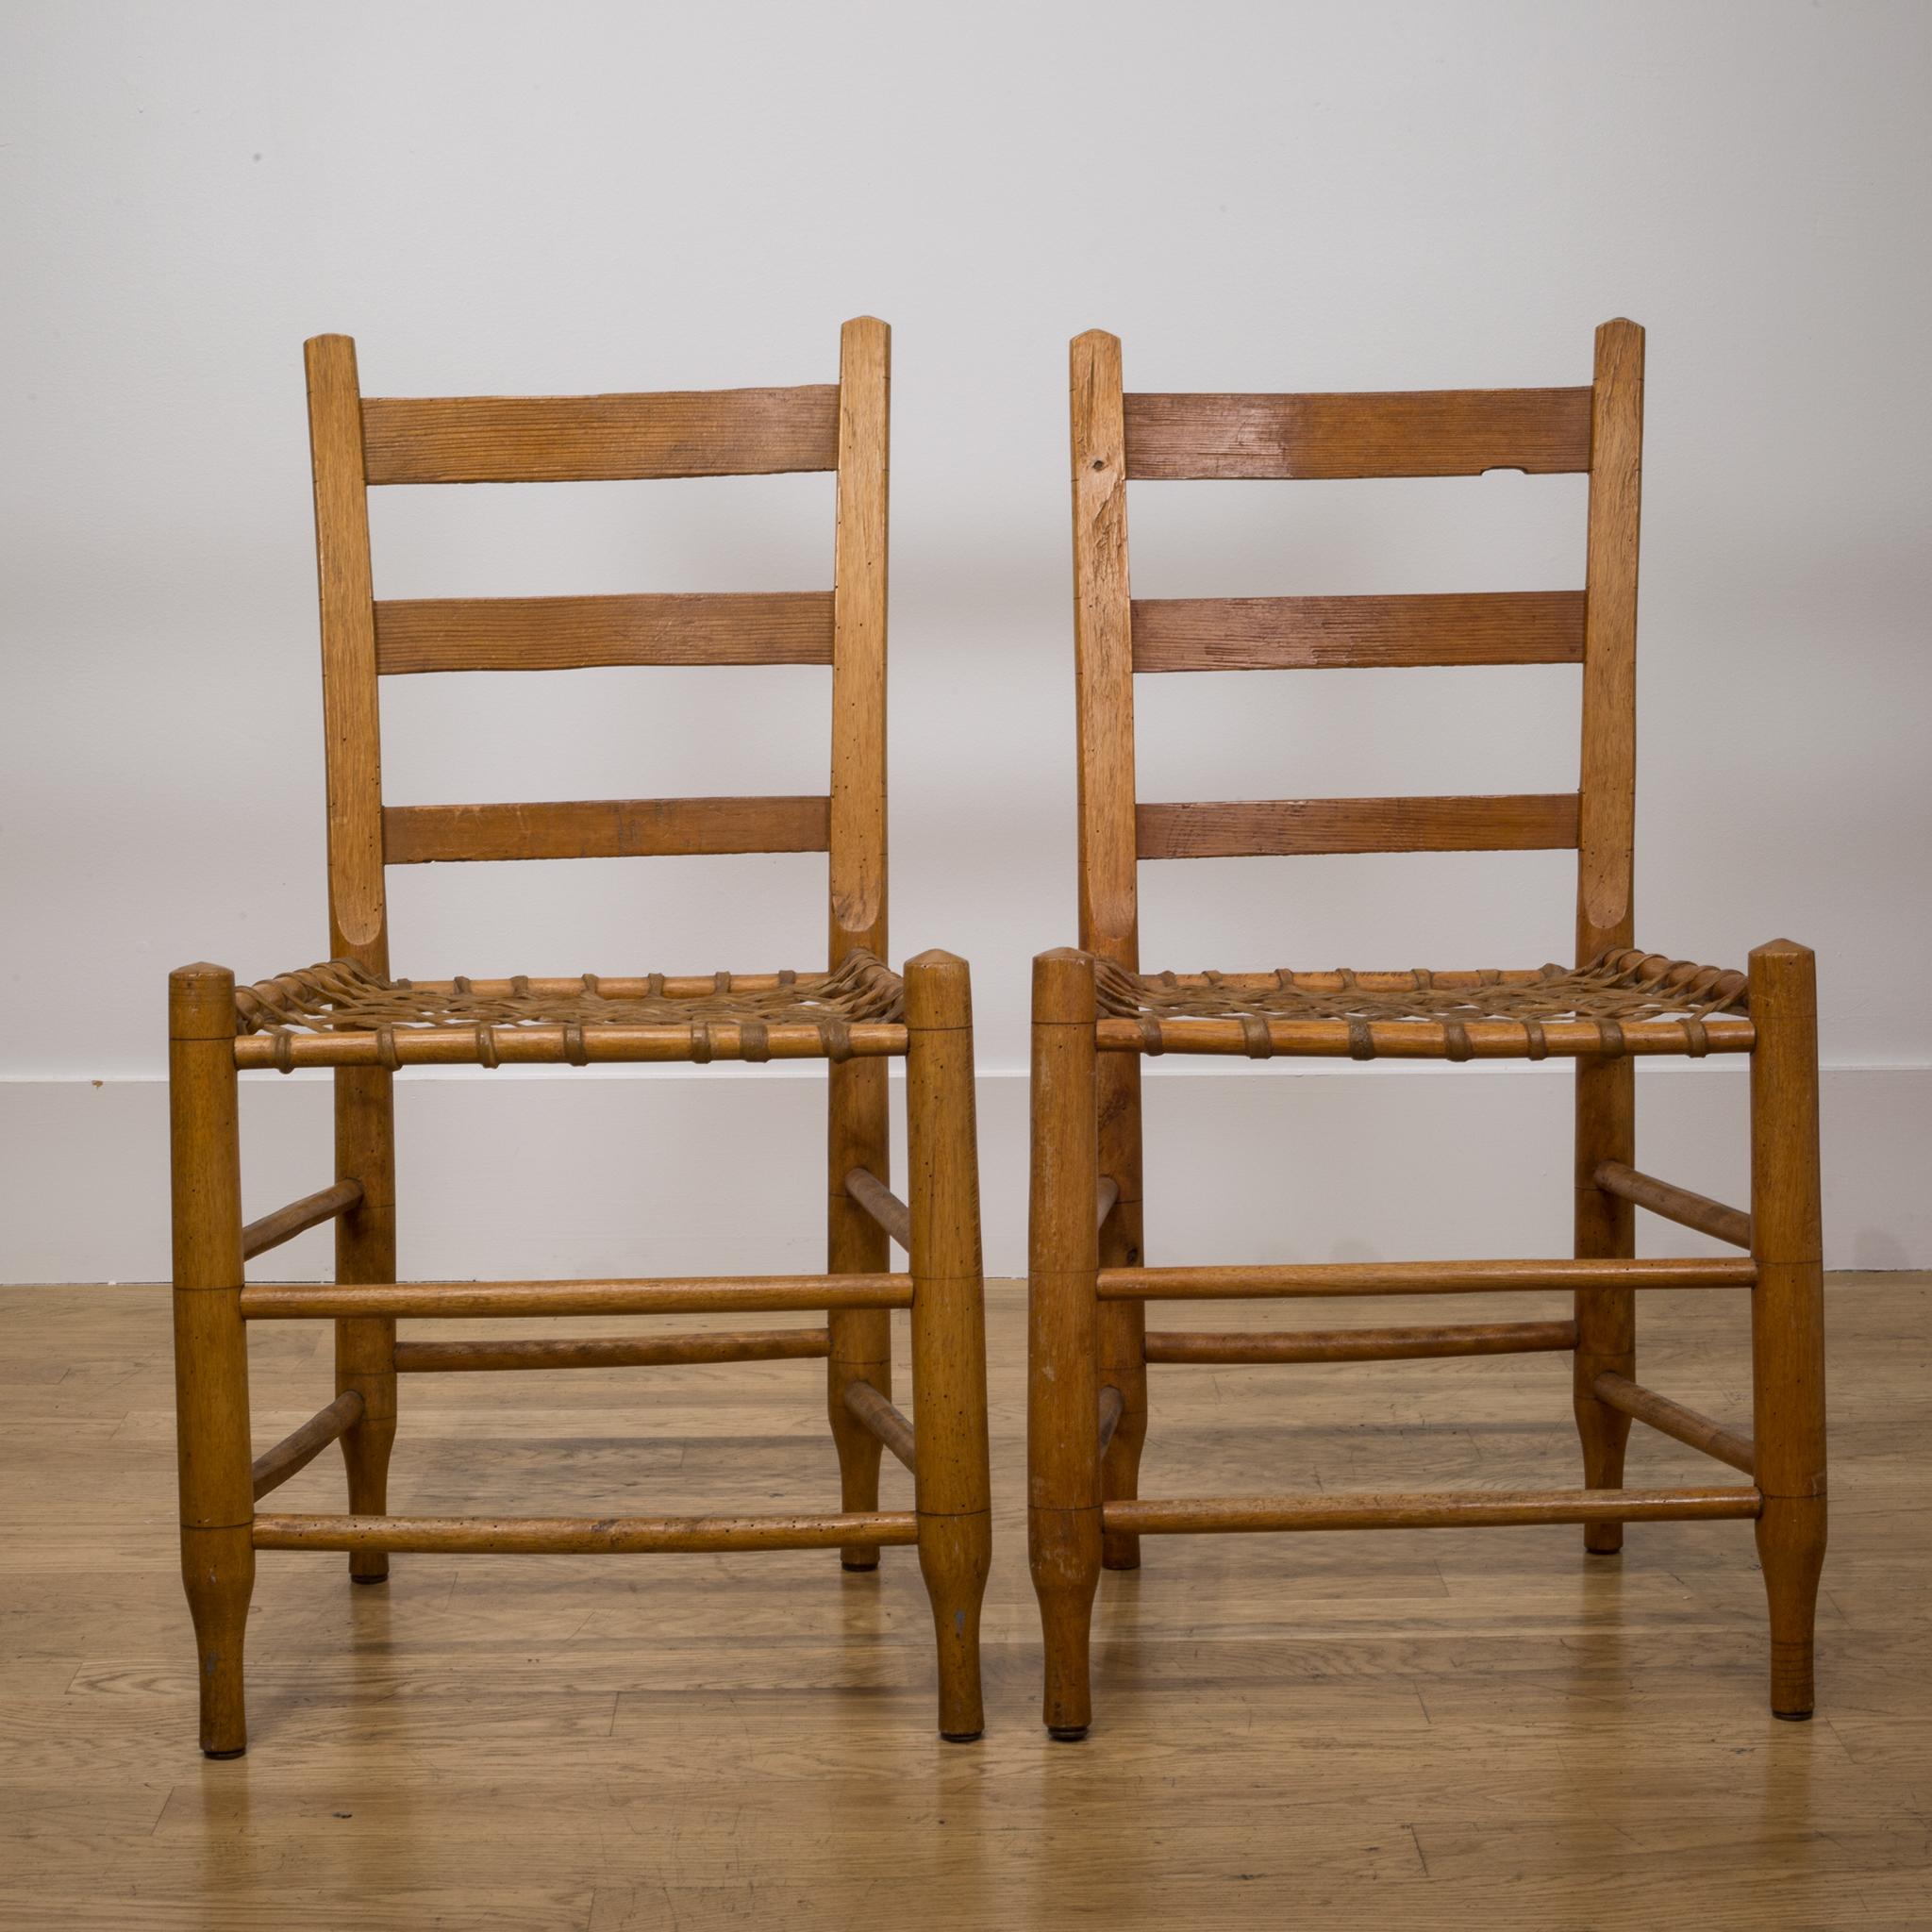 historic chairs